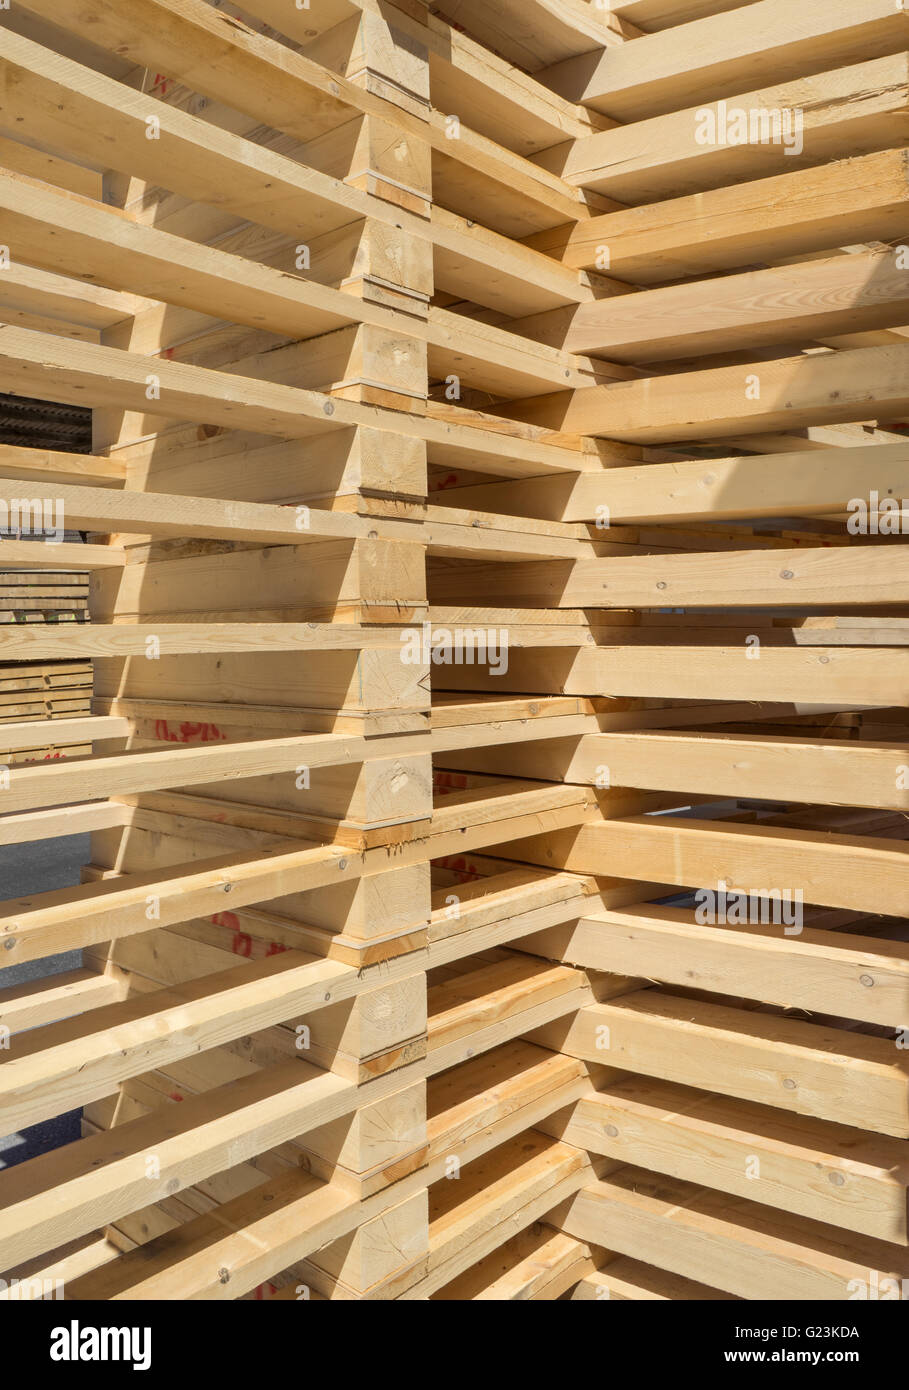 Stacked new pallets Stock Photo